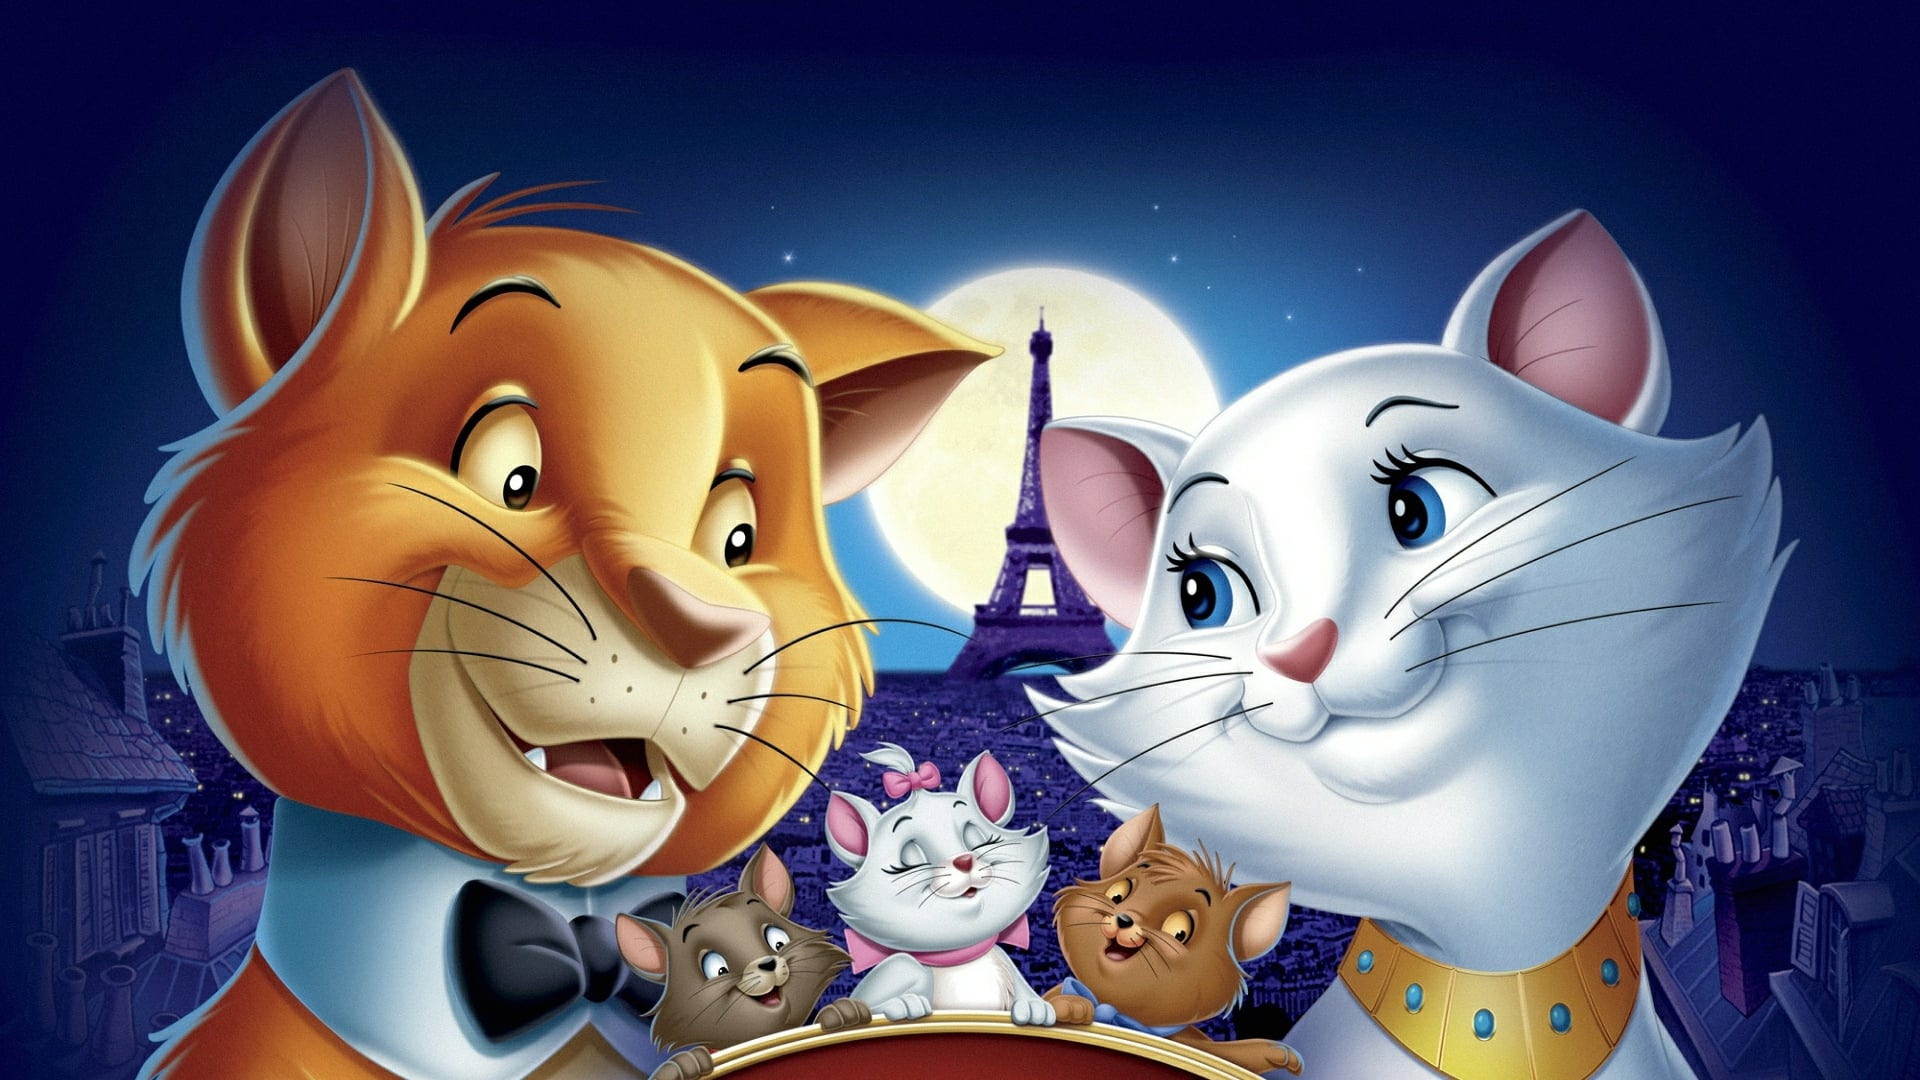 1920x1080 The Aristocats Full Movie Free Store, 60% OFF